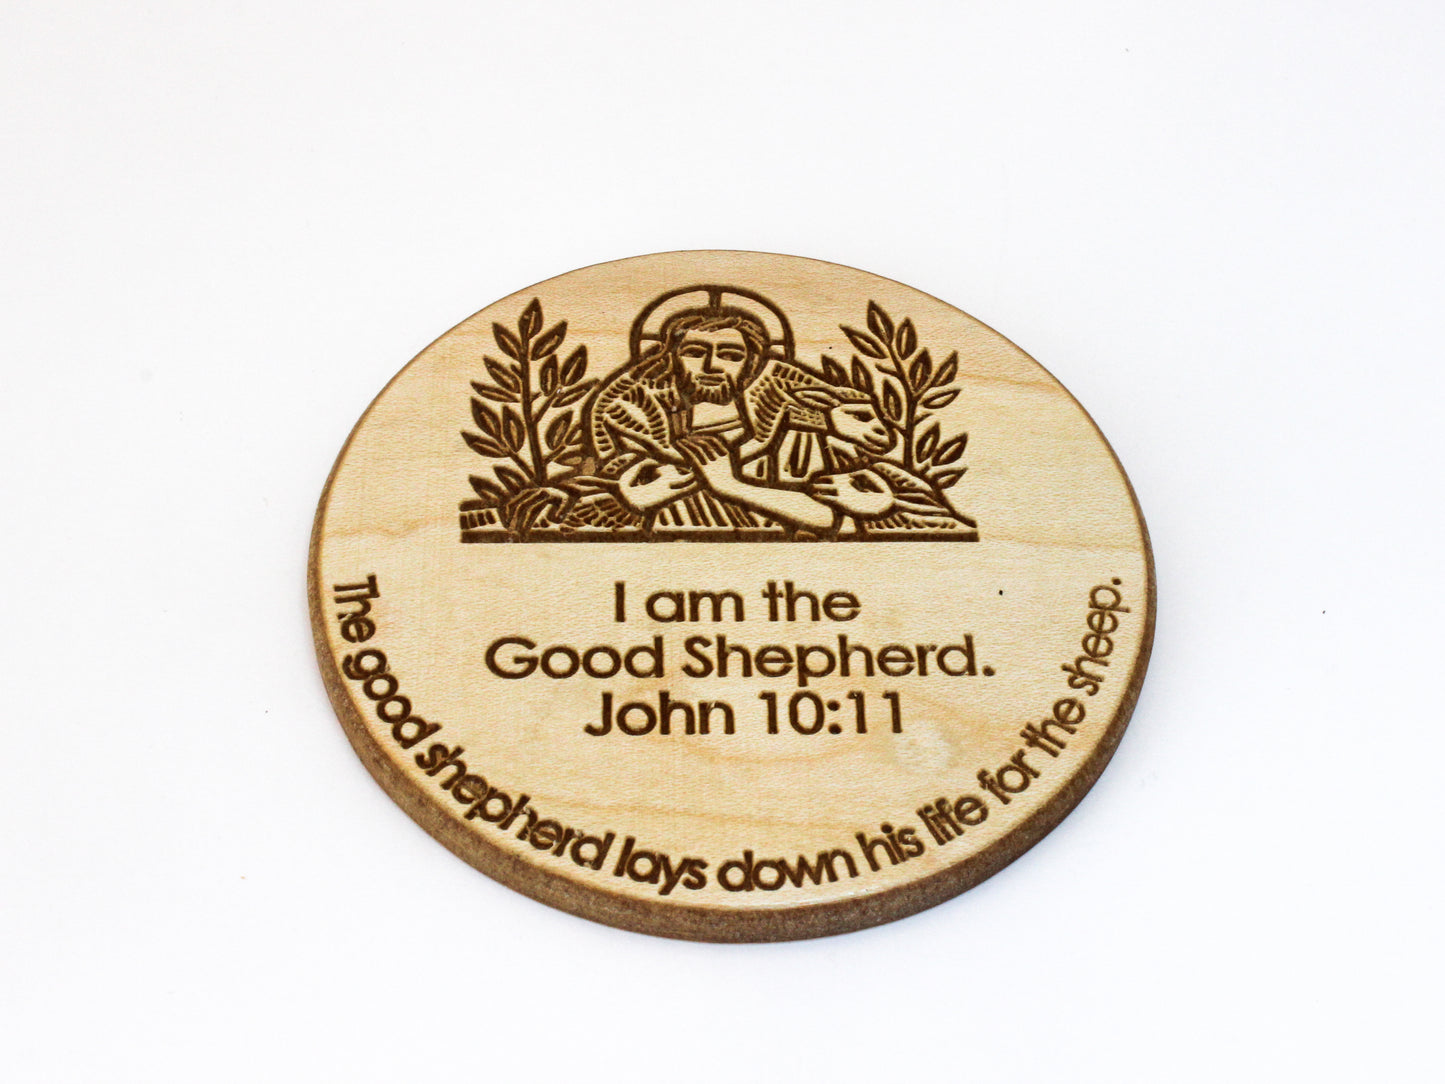 Wooden coaster featuring an image of Christ the Good Shepherd and the verse John 10:11: "I am the Good Shepherd. The good shepherd lays down his life for the sheep."